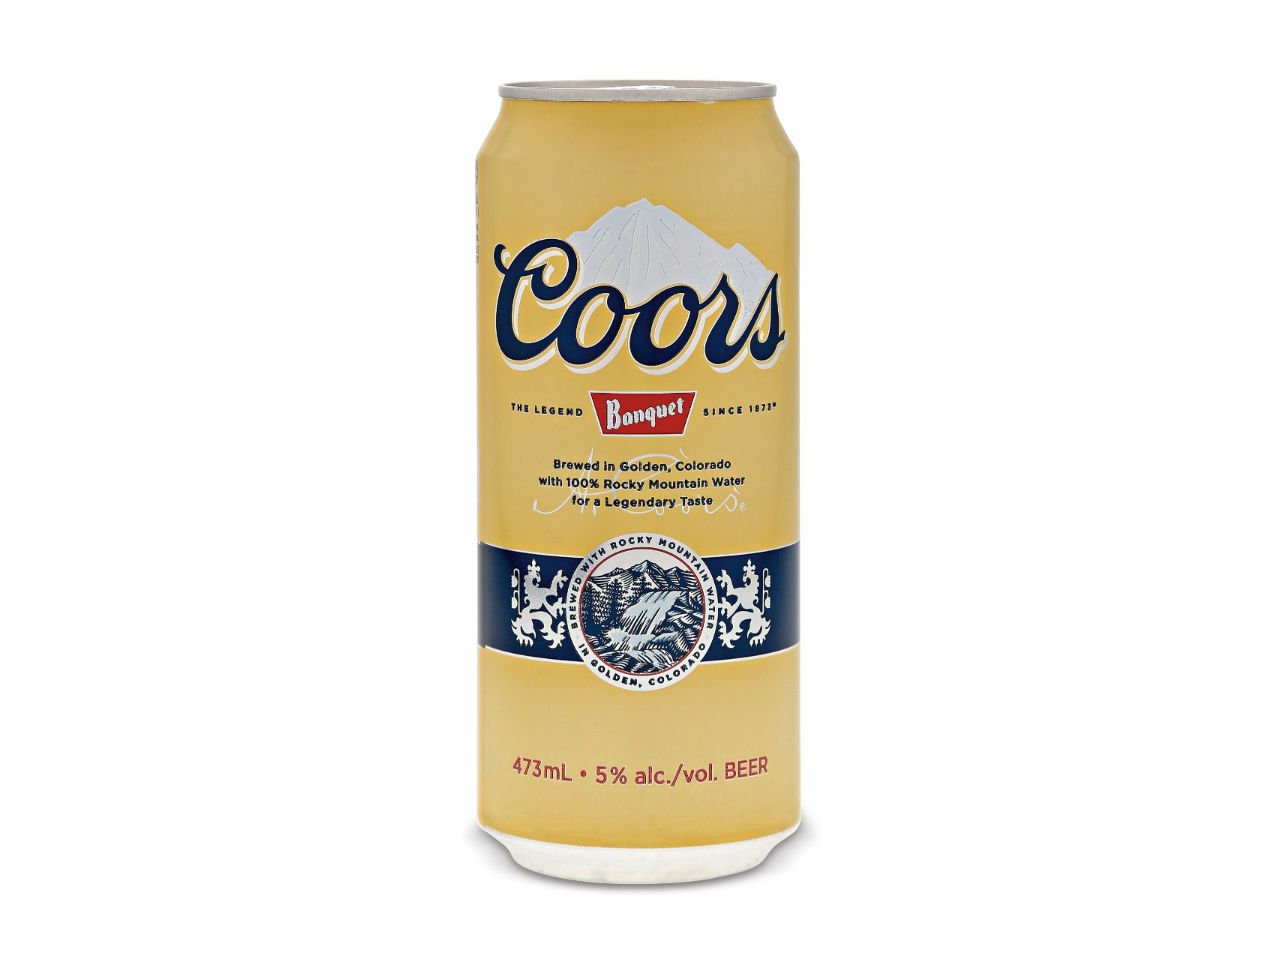 Coors Banquet beer in yellow can.